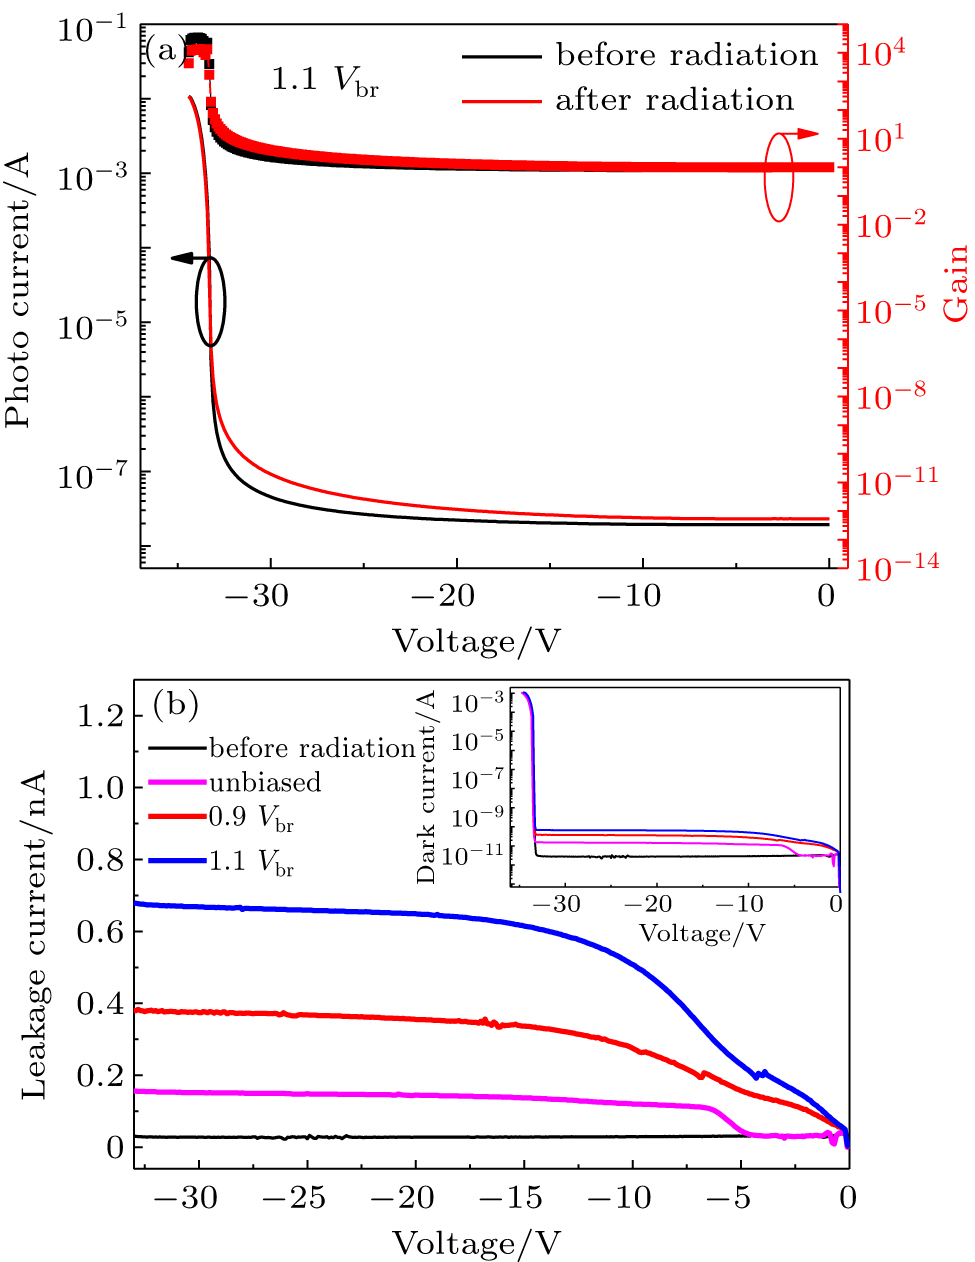 (a) The measured photocurrent and corresponding gain at 532 nm of the devices biased at 1.1 Vbr, which show negligible variations compared with the values before radiation. (b) Leakage current as a function of reverse voltage before and after radiation at room temperature. During the radiation, the samples are biased at 0.9 Vbr, 1.1 Vbr and unbiased, respectively, with the total radiation dose of 100 krad(Si) and dose rate of 50 rad(Si)/s. The inset shows the negligible changes of Vbr after radiation.